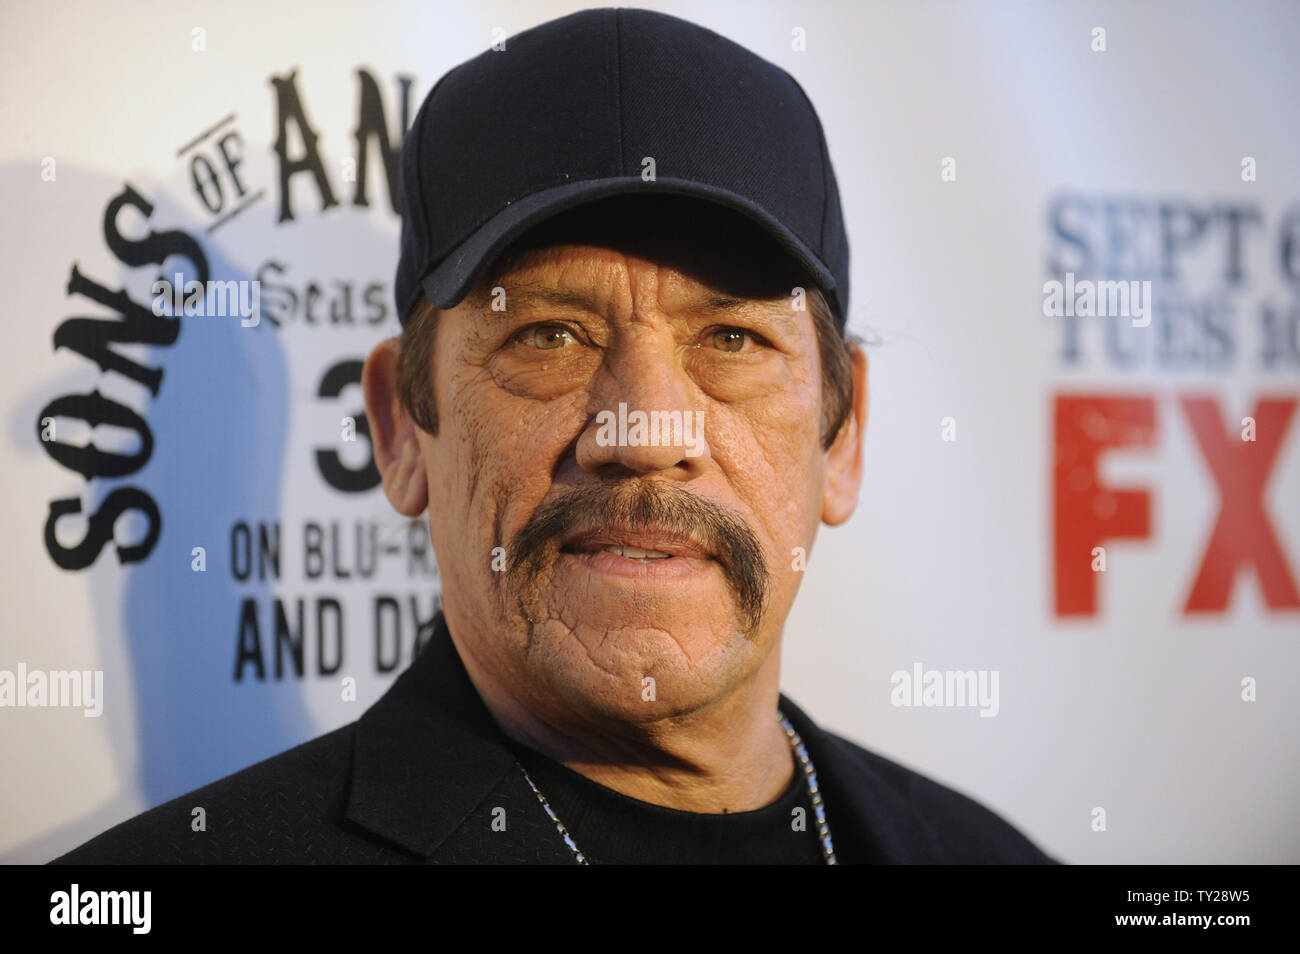 Cast member Danny Trejo attends the Sons of Anarchy, Season 4 premiere screening at the Arclight Theatre in the Hollywood section of Los Angeles on August 30, 2011.      UPI/Phil McCarten Stock Photo